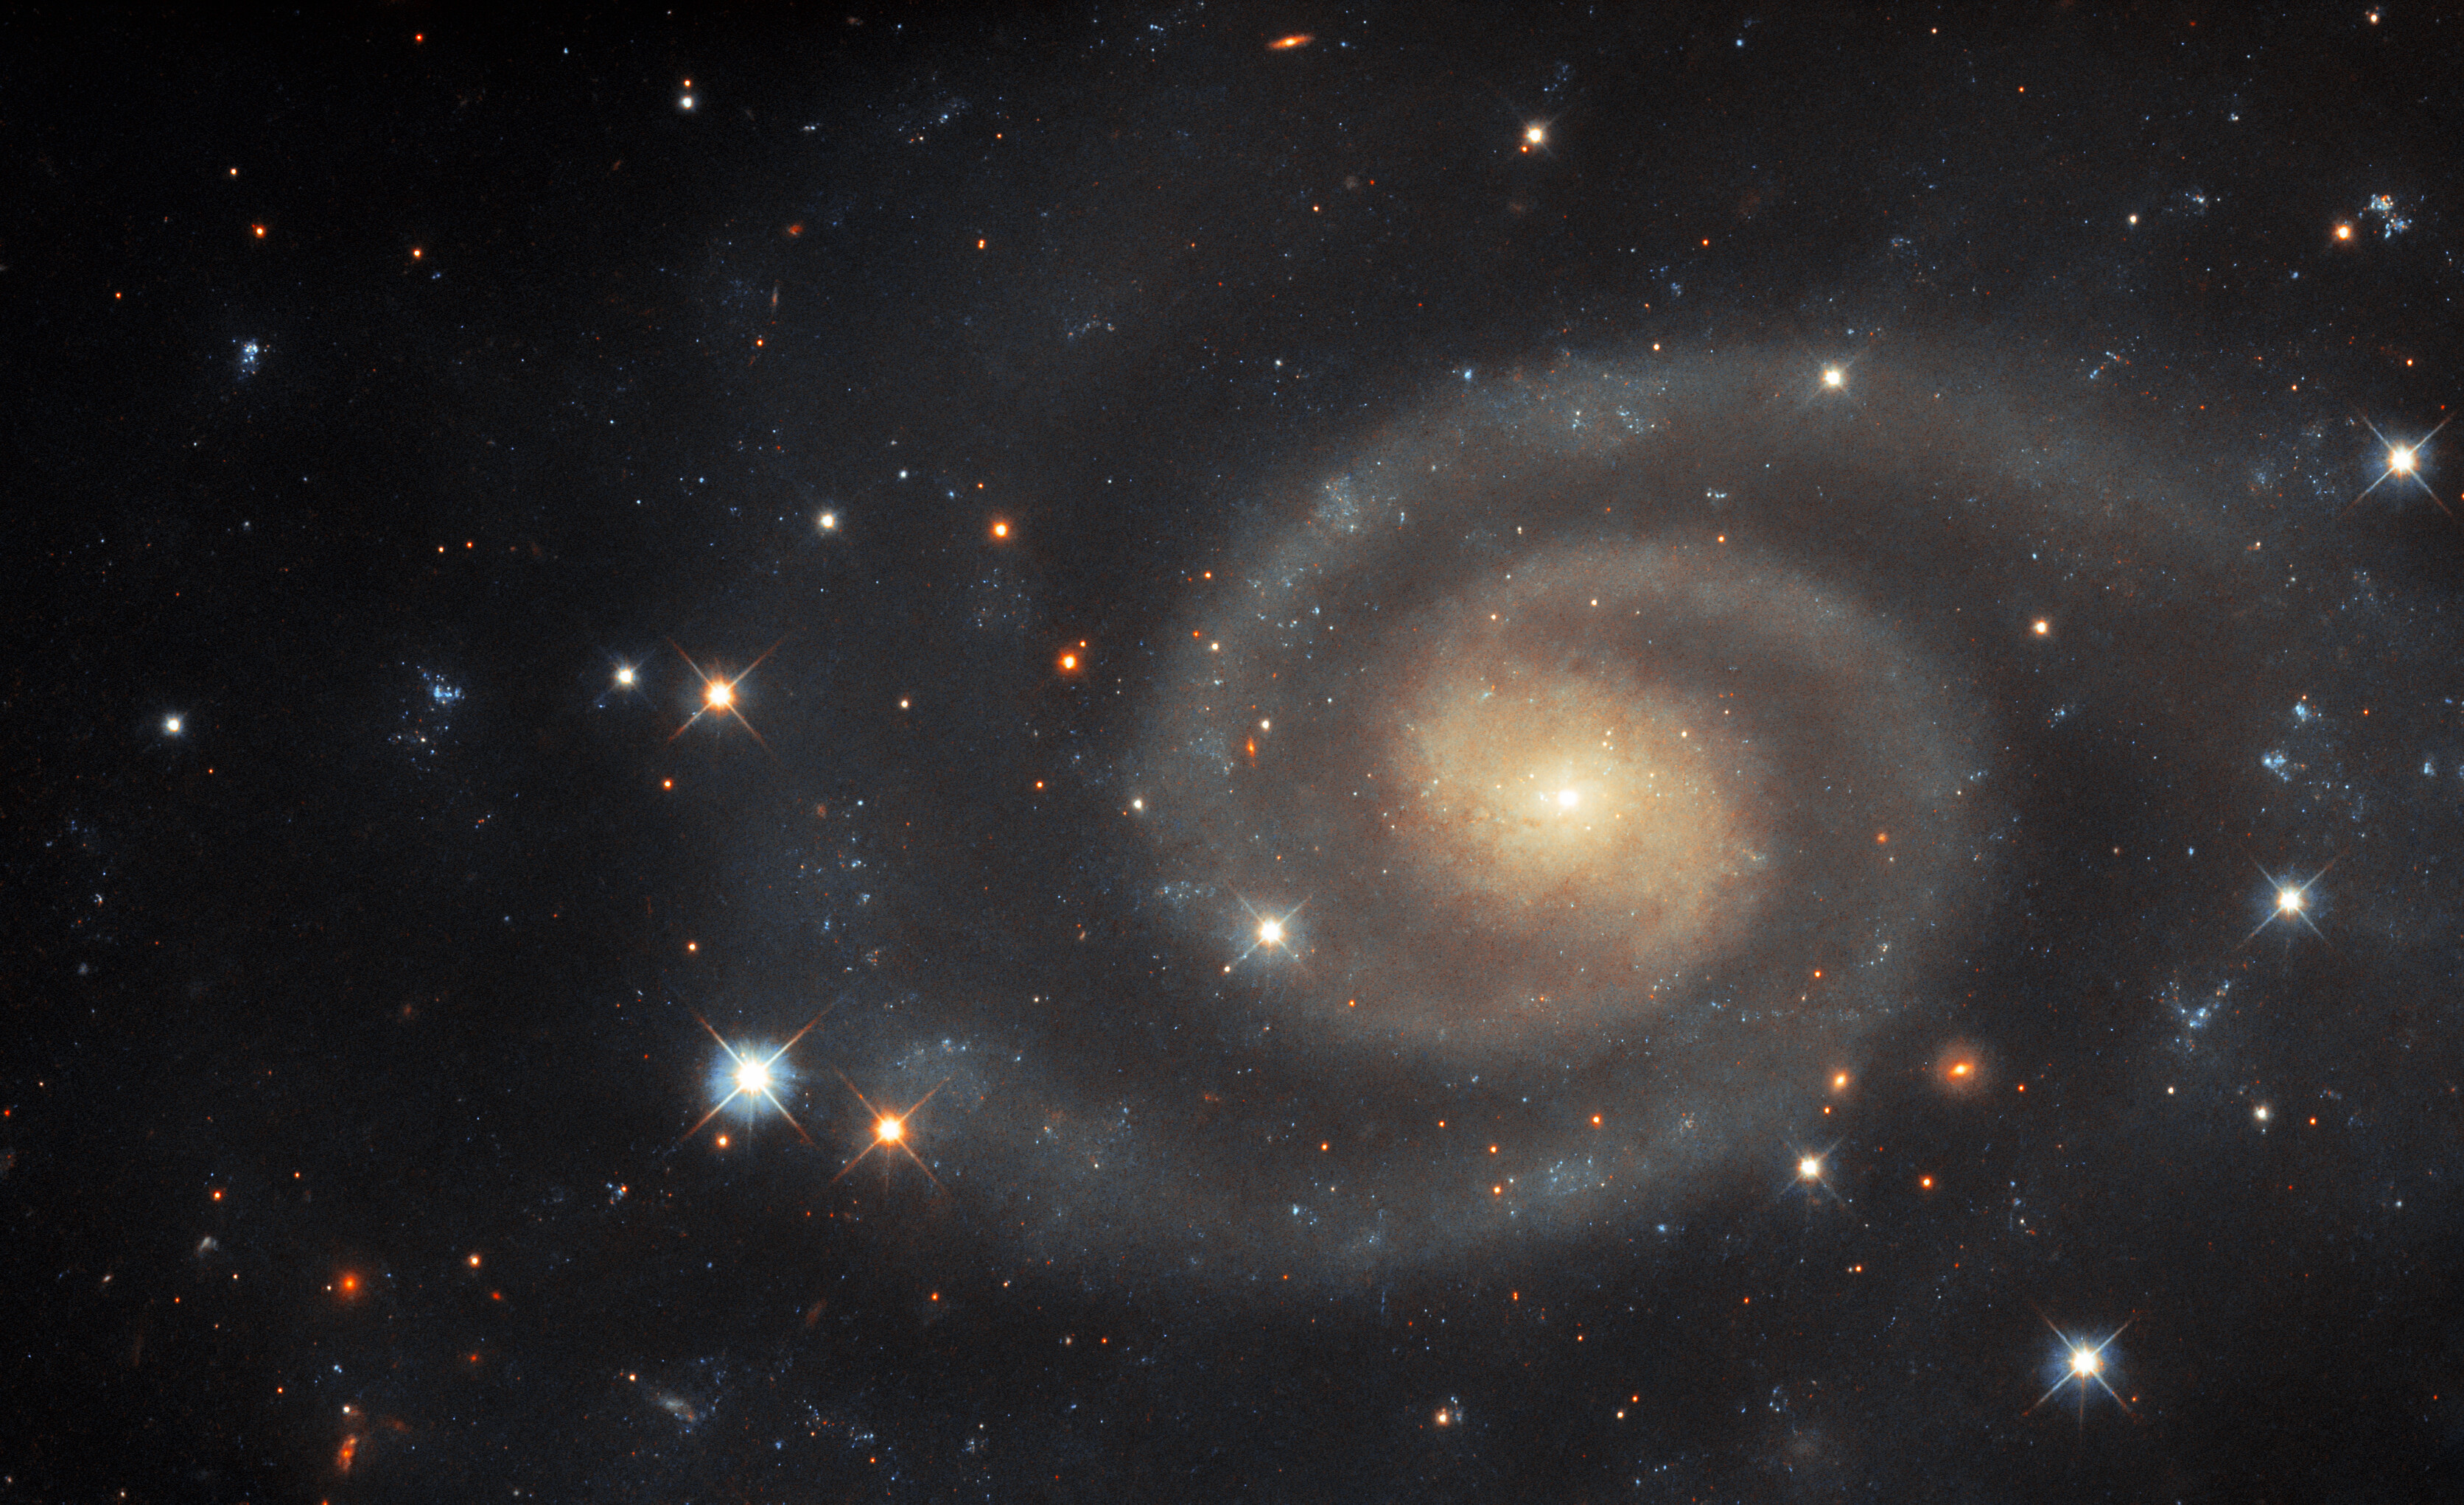 A spiral galaxy, with two prominent, tightly wound arms around the brighter core. The arms disperse into a wide halo of stars and dust at their ends, giving the galaxy an oval shape. A number of bright, foreground stars appear to flank the galaxy, each holding the signature cross of diffracting light. The image also holds a few distant background galaxies.